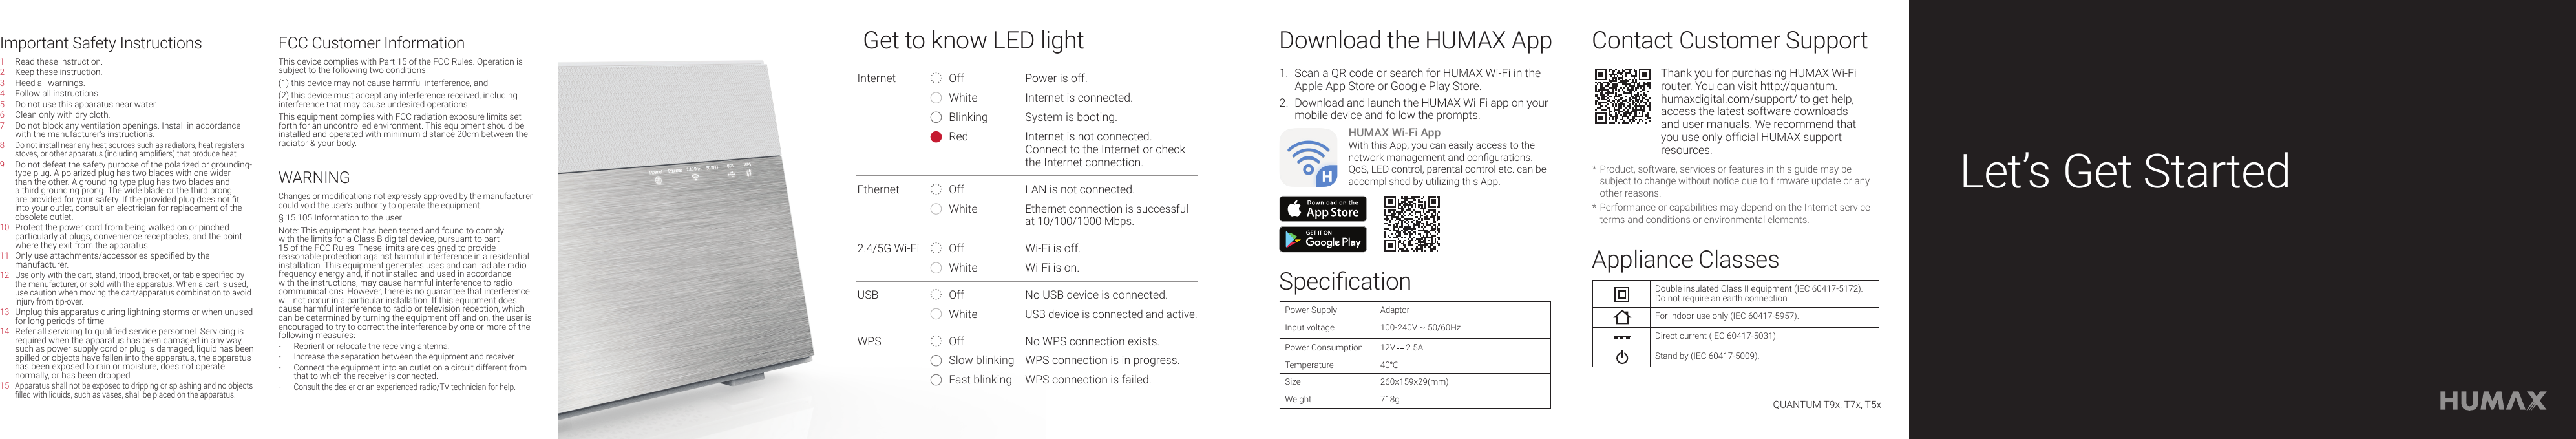 Download the HUMAX AppContact Customer SupportAppliance ClassesSpecication1.  Scan a QR code or search for HUMAX Wi-Fi in the Apple App Store or Google Play Store.2.  Download and launch the HUMAX Wi-Fi app on your mobile device and follow the prompts.HUMAX Wi-Fi AppWith this App, you can easily access to the network management and congurations. QoS, LED control, parental control etc. can be accomplished by utilizing this App.Thank you for purchasing HUMAX Wi-Fi router. You can visit http://quantum.humaxdigital.com/support/ to get help, access the latest software downloads and user manuals. We recommend that you use only ofcial HUMAX support resources.* Product, software, services or features in this guide may be subject to change without notice due to rmware update or any other reasons. * Performance or capabilities may depend on the Internet service terms and conditions or environmental elements.Double insulated Class II equipment (IEC 60417-5172).Do not require an earth connection.For indoor use only (IEC 60417-5957).Direct current (IEC 60417-5031).Stand by (IEC 60417-5009).Power SupplyAdaptorInput voltage 100-240V ~ 50/60HzPower Consumption 12V     2.5ATemperature 40°CSize 260x159x29(mm)Weight 718gLet’s Get StartedGet to know LED lightInternet Off Power is off.White Internet is connected.Blinking System is booting.Red Internet is not connected.Connect to the Internet or check the Internet connection.Ethernet Off LAN is not connected.WhiteEthernet connection is successful at 10/100/1000 Mbps.2.4/5G Wi-Fi Off Wi-Fi is off.White Wi-Fi is on.USB Off No USB device is connected.WhiteUSB device is connected and active.WPS Off No WPS connection exists.Slow blinking WPS connection is in progress.Fast blinking WPS connection is failed.QUANTUM T9x, T7x, T5xImportant Safety Instructions FCC Customer InformationWARNING1 Read these instruction.2 Keep these instruction.3 Heed all warnings.4 Follow all instructions.5 Do not use this apparatus near water.6 Clean only with dry cloth.7 Do not block any ventilation openings. Install in accordance with the manufacturer’s instructions.8 Do not install near any heat sources such as radiators, heat registers stoves, or other apparatus (including ampliers) that produce heat.9 Do not defeat the safety purpose of the polarized or grounding-type plug. A polarized plug has two blades with one wider than the other. A grounding type plug has two blades and a third grounding prong. The wide blade or the third prong are provided for your safety. If the provided plug does not t into your outlet, consult an electrician for replacement of the obsolete outlet.10 Protect the power cord from being walked on or pinched particularly at plugs, convenience receptacles, and the point where they exit from the apparatus.11 Only use attachments/accessories specied by the manufacturer.12 Use only with the cart, stand, tripod, bracket, or table specied by the manufacturer, or sold with the apparatus. When a cart is used, use caution when moving the cart/apparatus combination to avoid injury from tip-over.13 Unplug this apparatus during lightning storms or when unused for long periods of time14 Refer all servicing to qualied service personnel. Servicing is required when the apparatus has been damaged in any way, such as power supply cord or plug is damaged, liquid has been spilled or objects have fallen into the apparatus, the apparatus has been exposed to rain or moisture, does not operate normally, or has been dropped. 15 Apparatus shall not be exposed to dripping or splashing and no objects lled with liquids, such as vases, shall be placed on the apparatus.This device complies with Part 15 of the FCC Rules. Operation is subject to the following two conditions:(1) this device may not cause harmful interference, and (2) this device must accept any interference received, including interference that may cause undesired operations.This equipment complies with FCC radiation exposure limits set forth for an uncontrolled environment. This equipment should be installed and operated with minimum distance 20cm between the radiator &amp; your body.Changes or modications not expressly approved by the manufacturer could void the user’s authority to operate the equipment.§ 15.105 Information to the user.Note: This equipment has been tested and found to comply with the limits for a Class B digital device, pursuant to part 15 of the FCC Rules. These limits are designed to provide reasonable protection against harmful interference in a residential installation. This equipment generates uses and can radiate radio frequency energy and, if not installed and used in accordance with the instructions, may cause harmful interference to radio communications. However, there is no guarantee that interference will not occur in a particular installation. If this equipment does cause harmful interference to radio or television reception, which can be determined by turning the equipment off and on, the user is encouraged to try to correct the interference by one or more of the following measures:-  Reorient or relocate the receiving antenna.- Increase the separation between the equipment and receiver.-  Connect the equipment into an outlet on a circuit different from that to which the receiver is connected.- Consult the dealer or an experienced radio/TV technician for help.